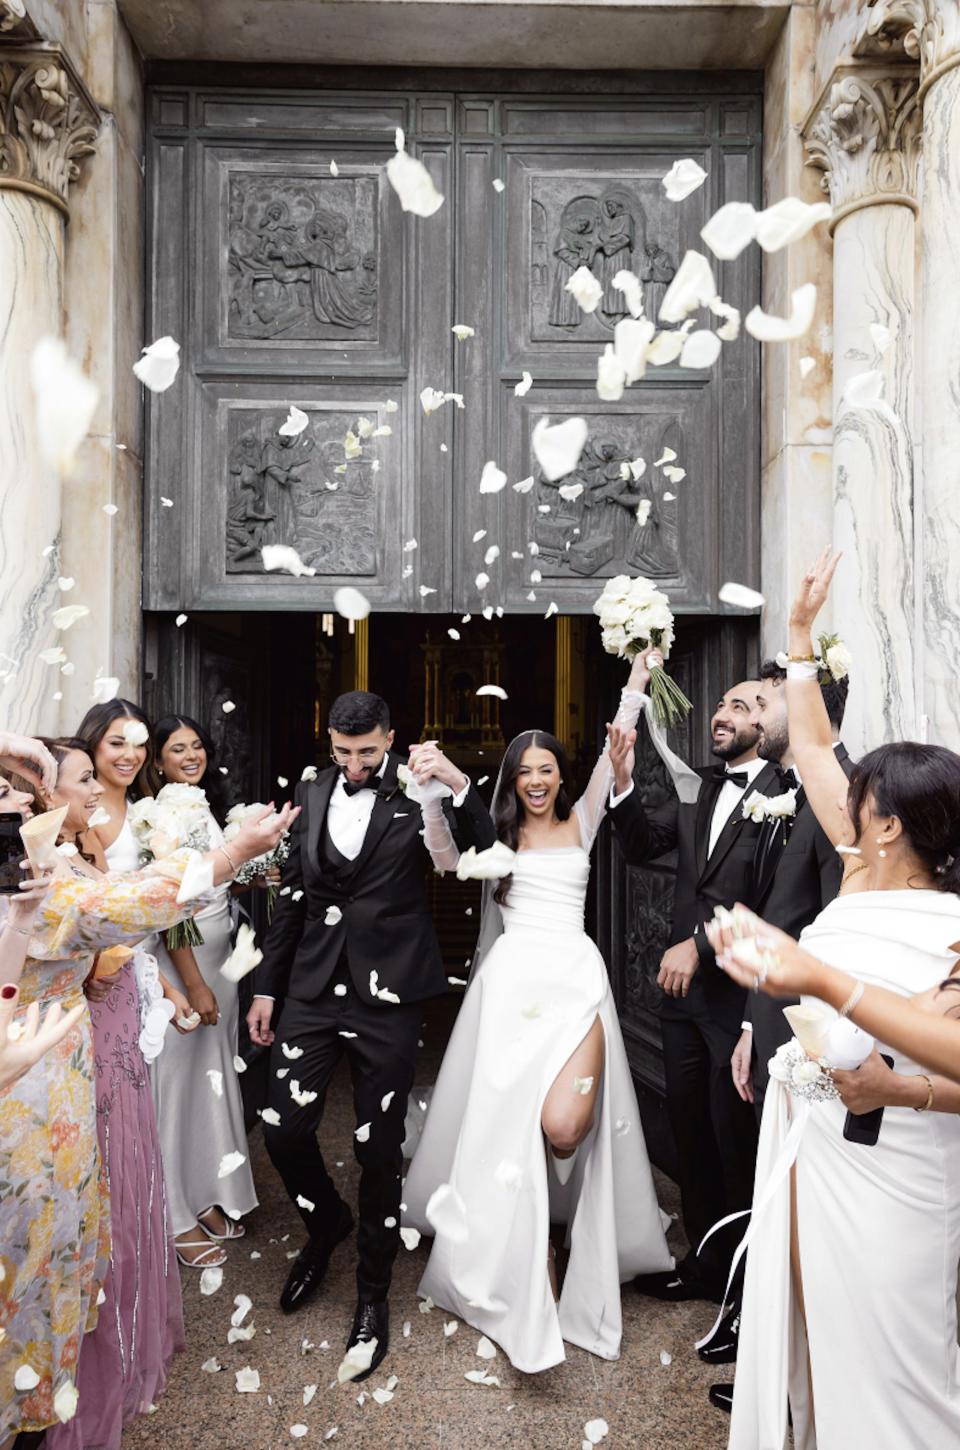 A bride and groom raise their hands in celebration as their wedding guests throw flower petals on them.